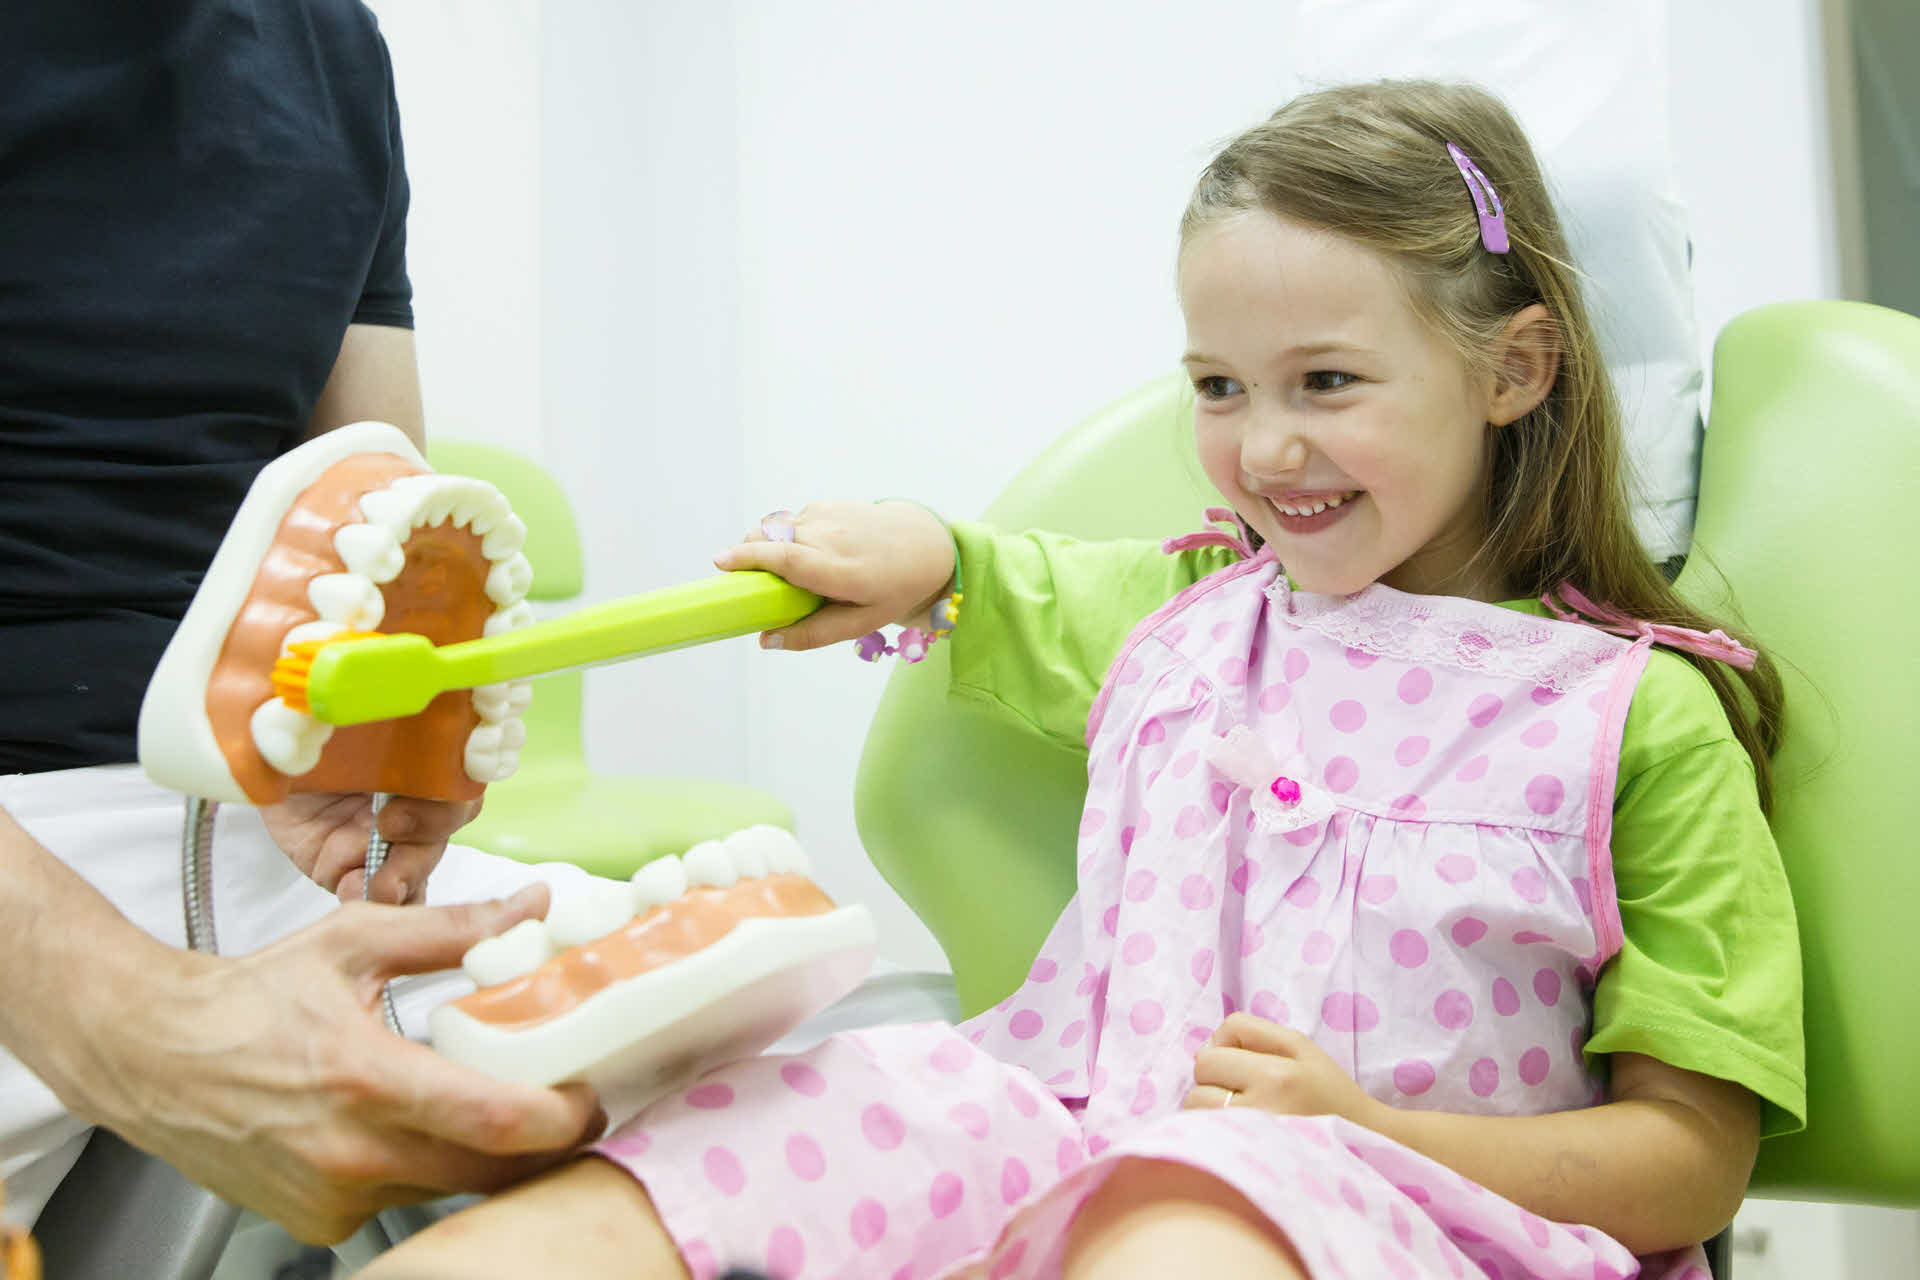 Family dentists in Boise and Eagle, we provide complete preventative dentistry for all ages.